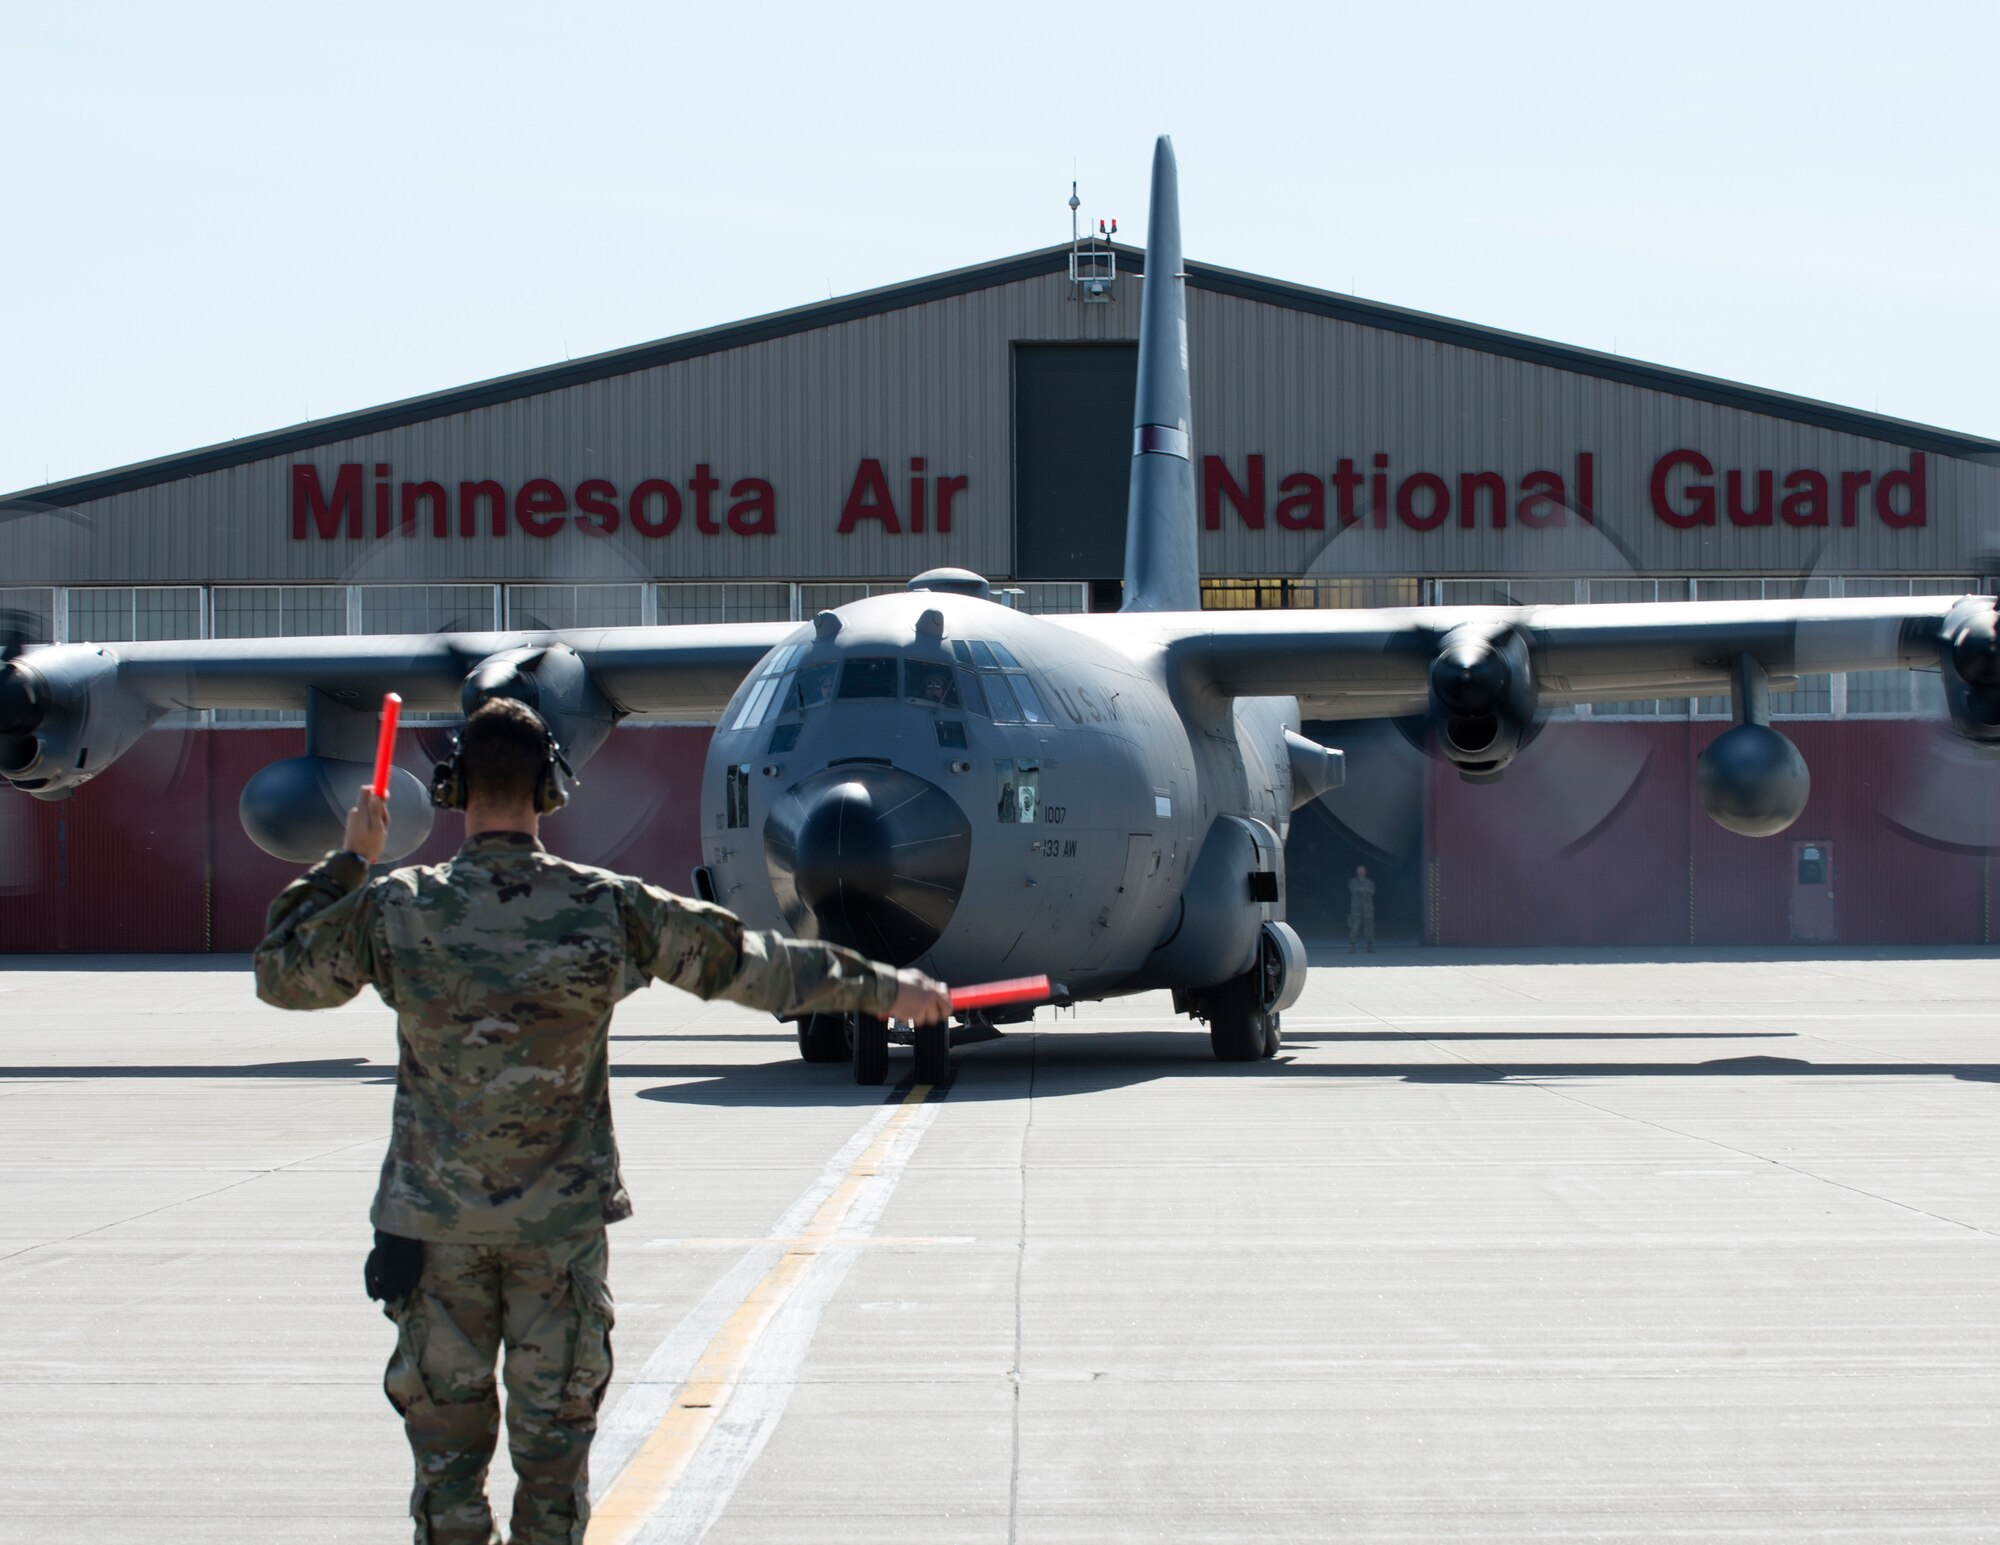 U.S. Air Force C-130 Hercules assigned to the 133rd Airlift Wing participated in a two-phased movement of supplies with Alpha Company, 134th Brigade Support Battalion destined for Minnesota State Patrol in St. Paul, Minn., May 31 2020.